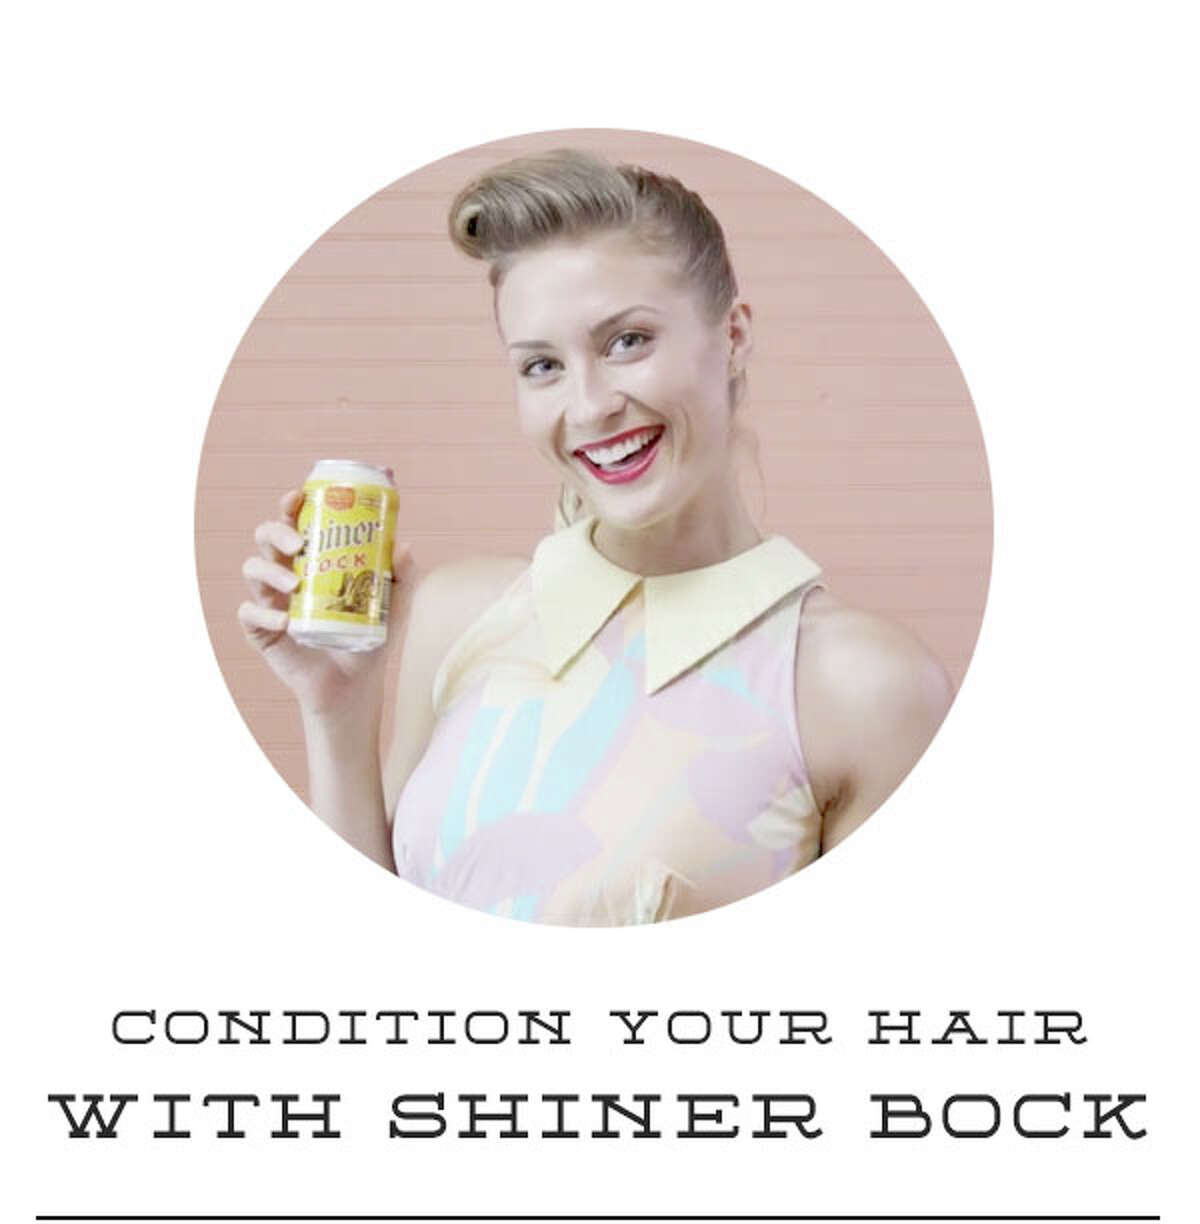 Birds Barshops in Austin are offering a free service: Washing customers' hair with Shiner Bock beer.